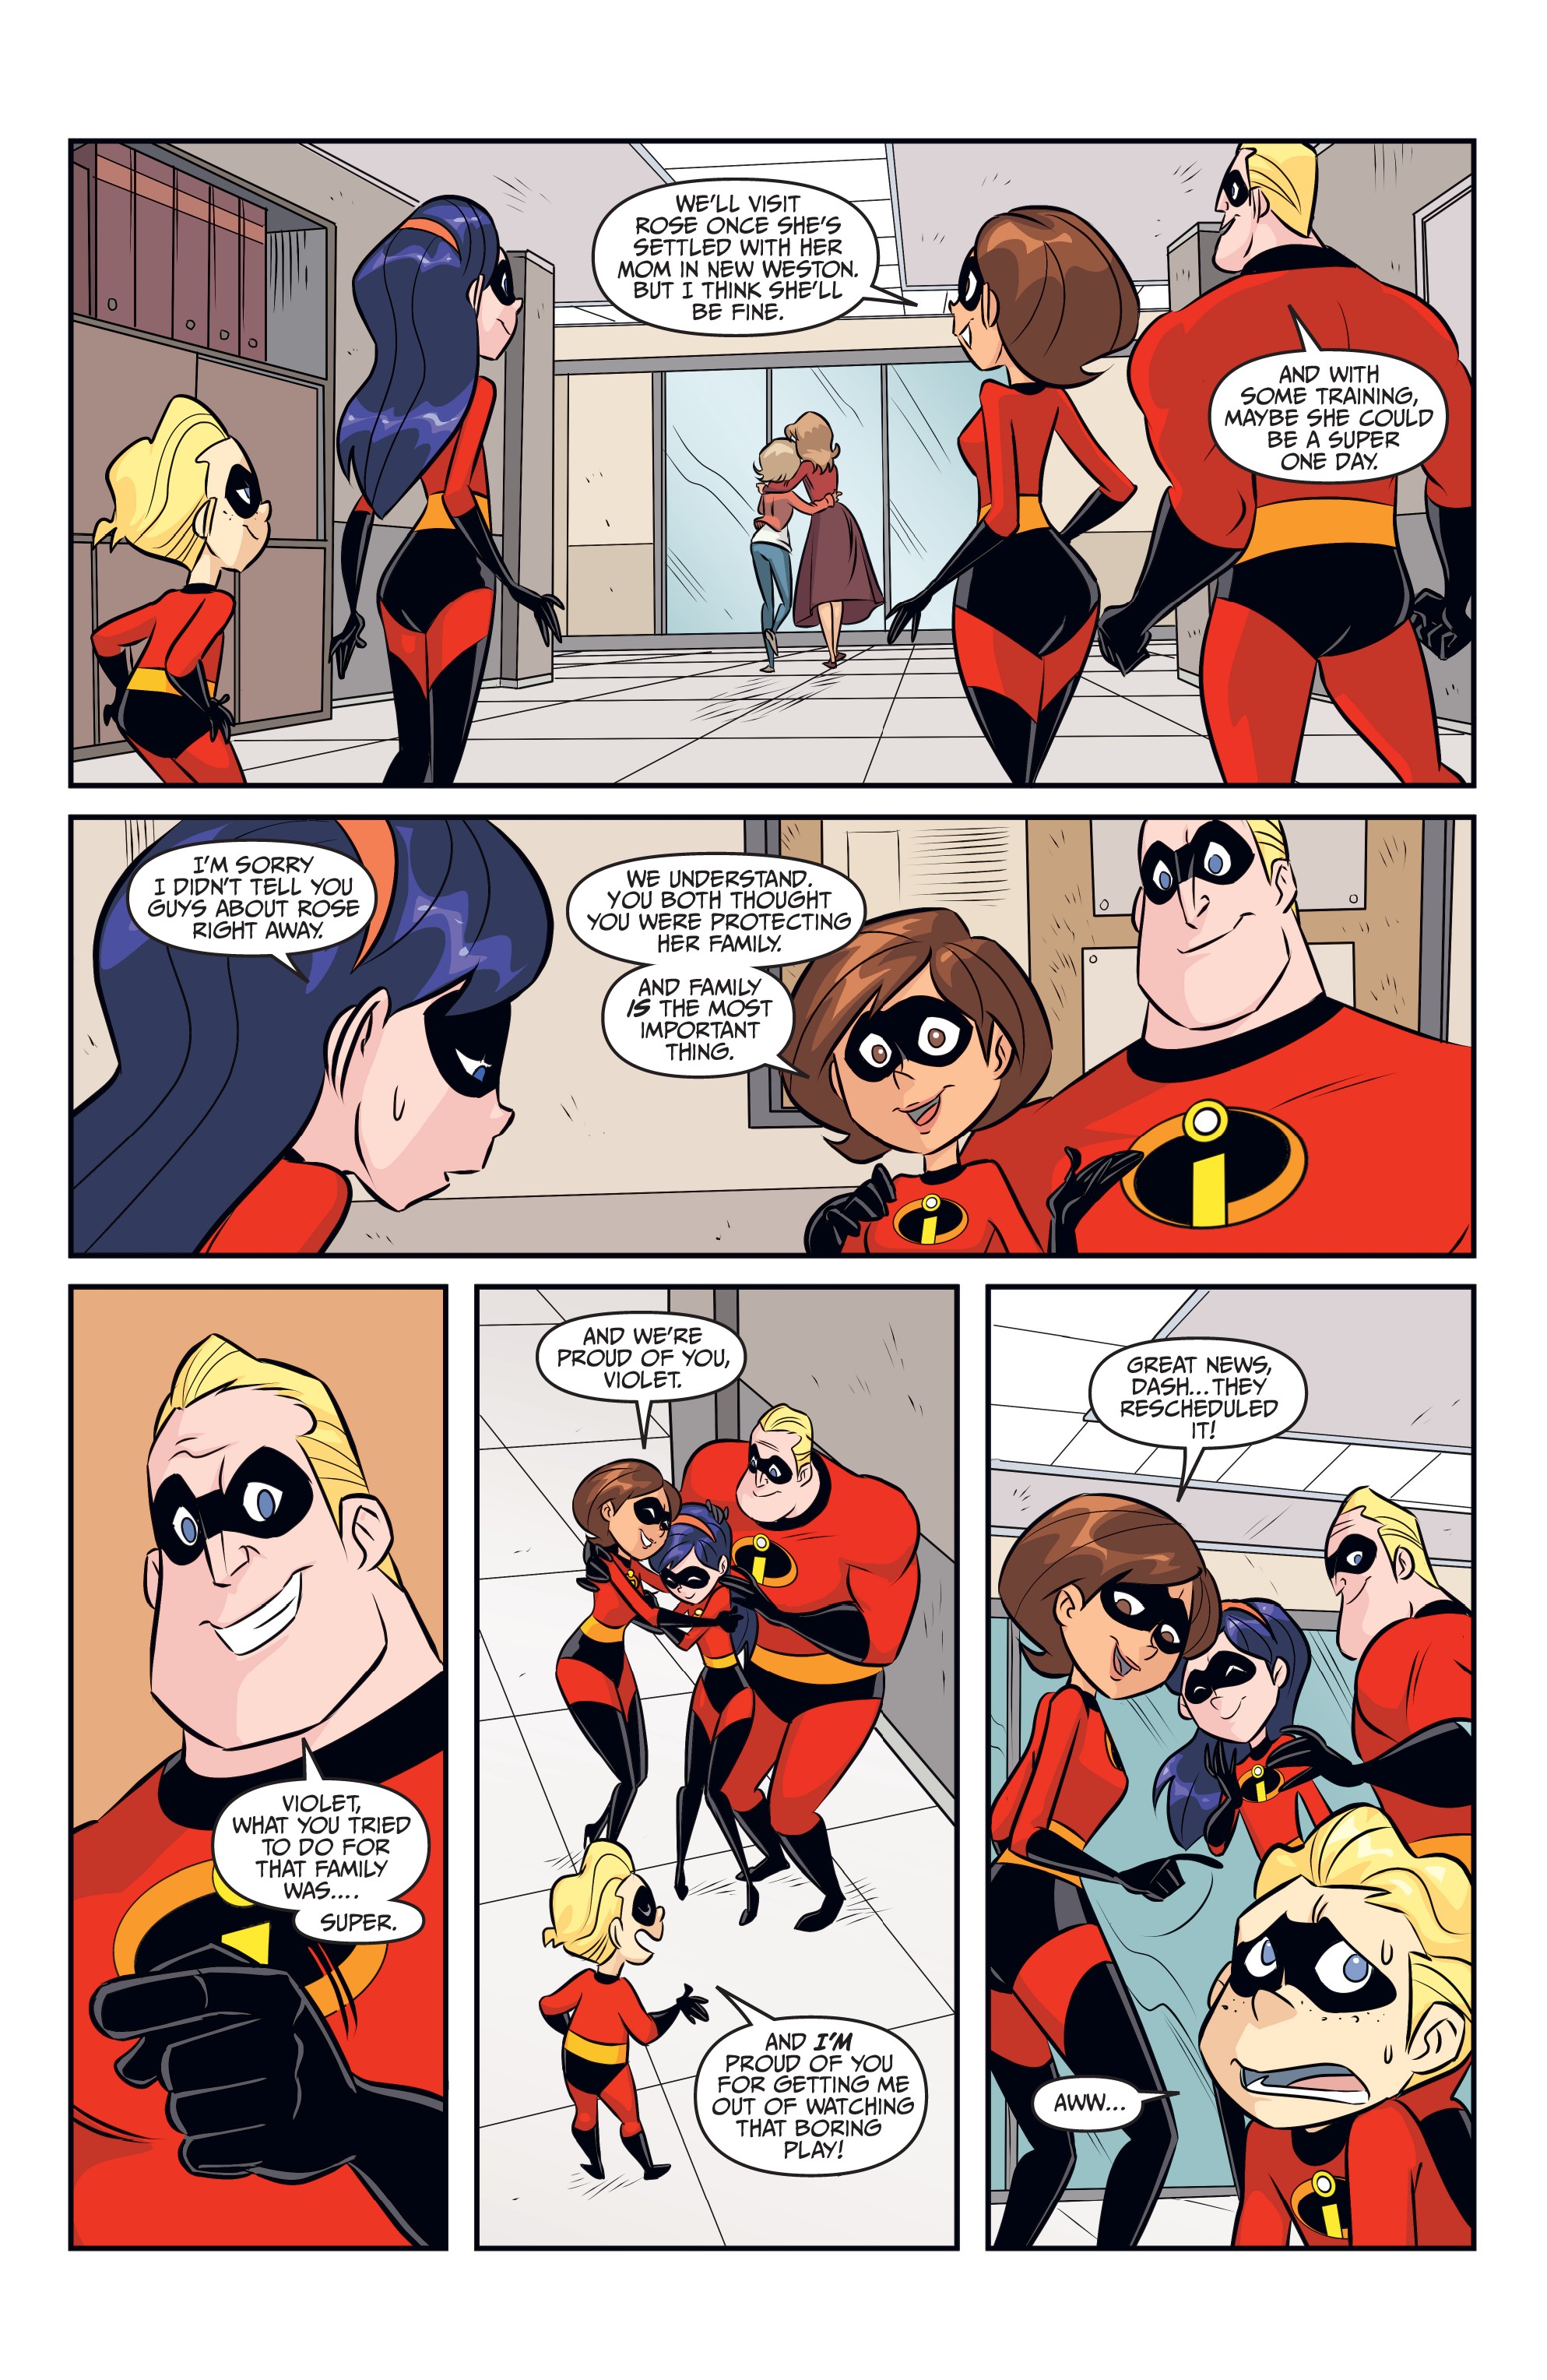 Violet And Dash Incredibles Porn Comic Chapter - Disney PIXAR The Incredibles 2 Secret Identities Issue 3 ...